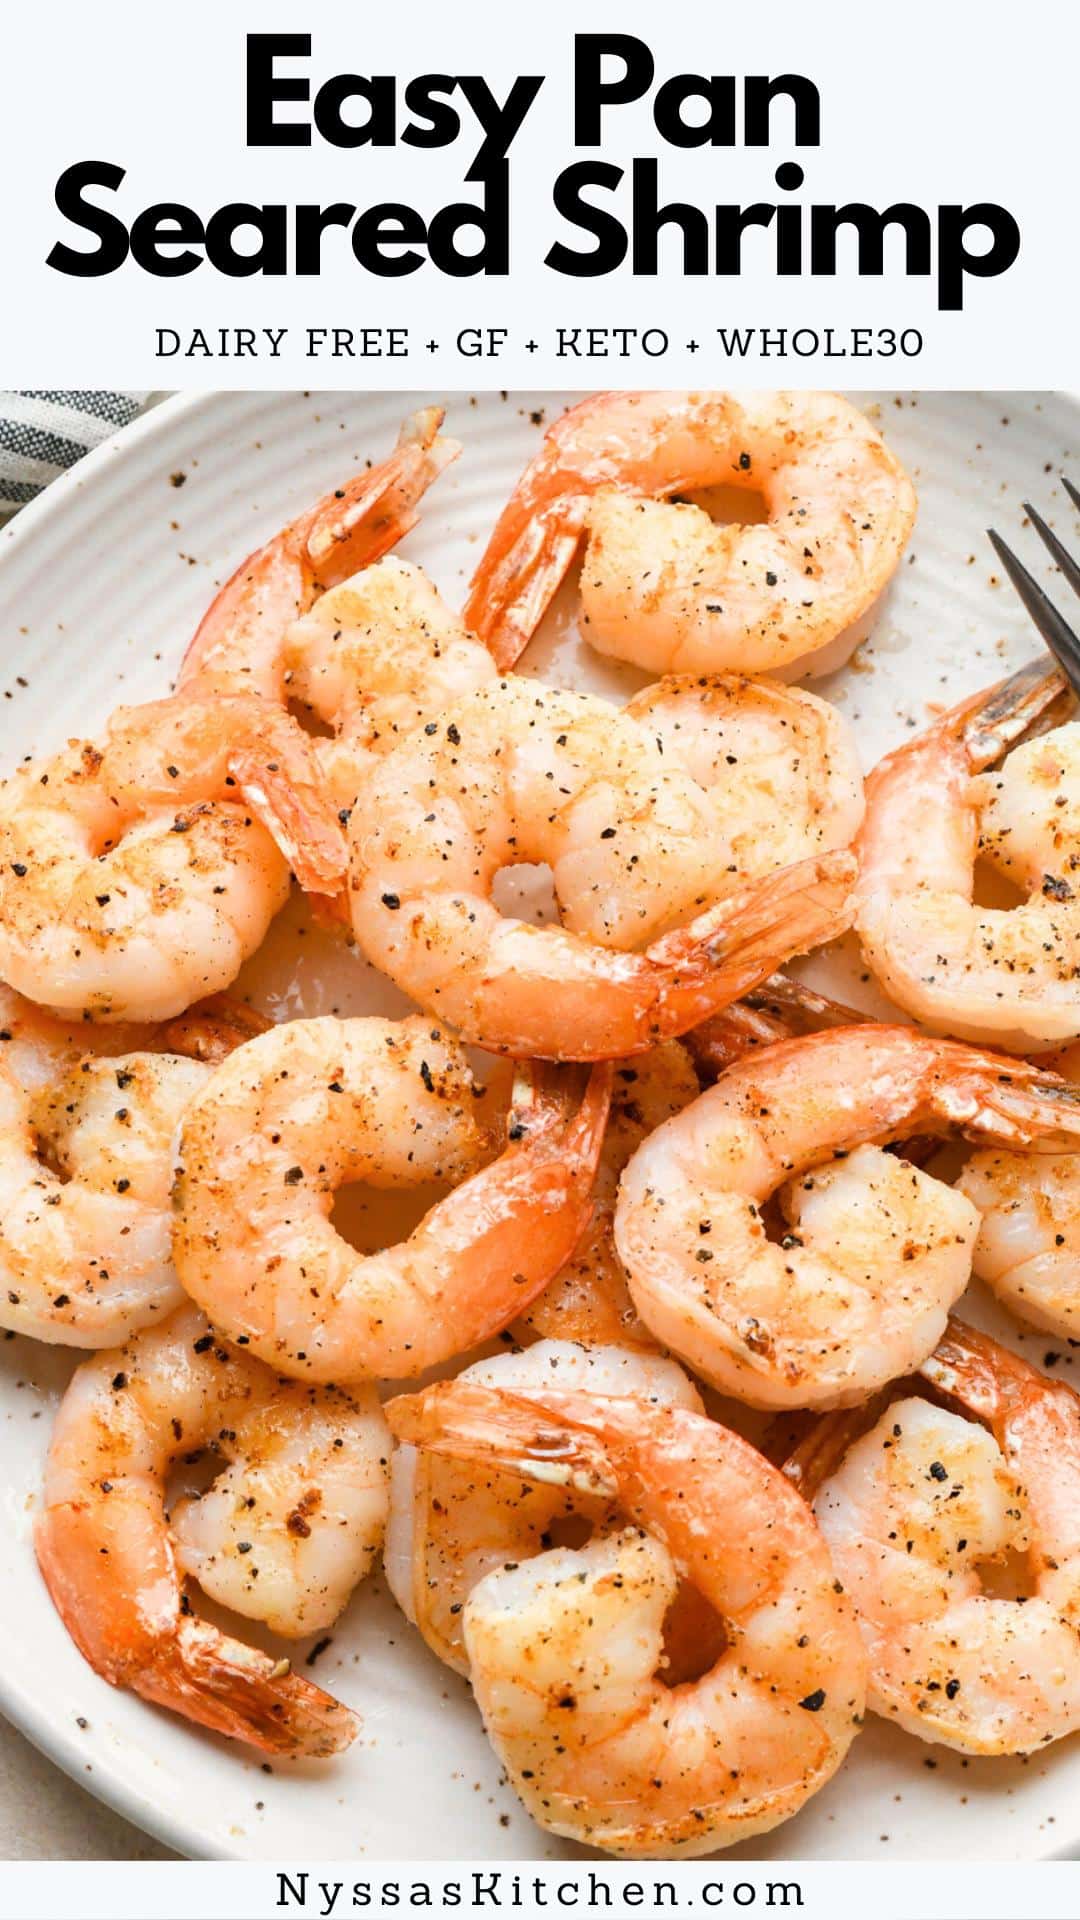 This pan seared shrimp is an easy seafood recipe that will impress your taste buds and dinner guests alike! With just a few simple steps, you can create a restaurant-quality dish at home that is flavorful and foolproof. Ready in just 10 minutes, versatile and perfect for a quick lunch or dinner. Gluten free, dairy free, paleo, Whole30 compatible, and keto friendly.